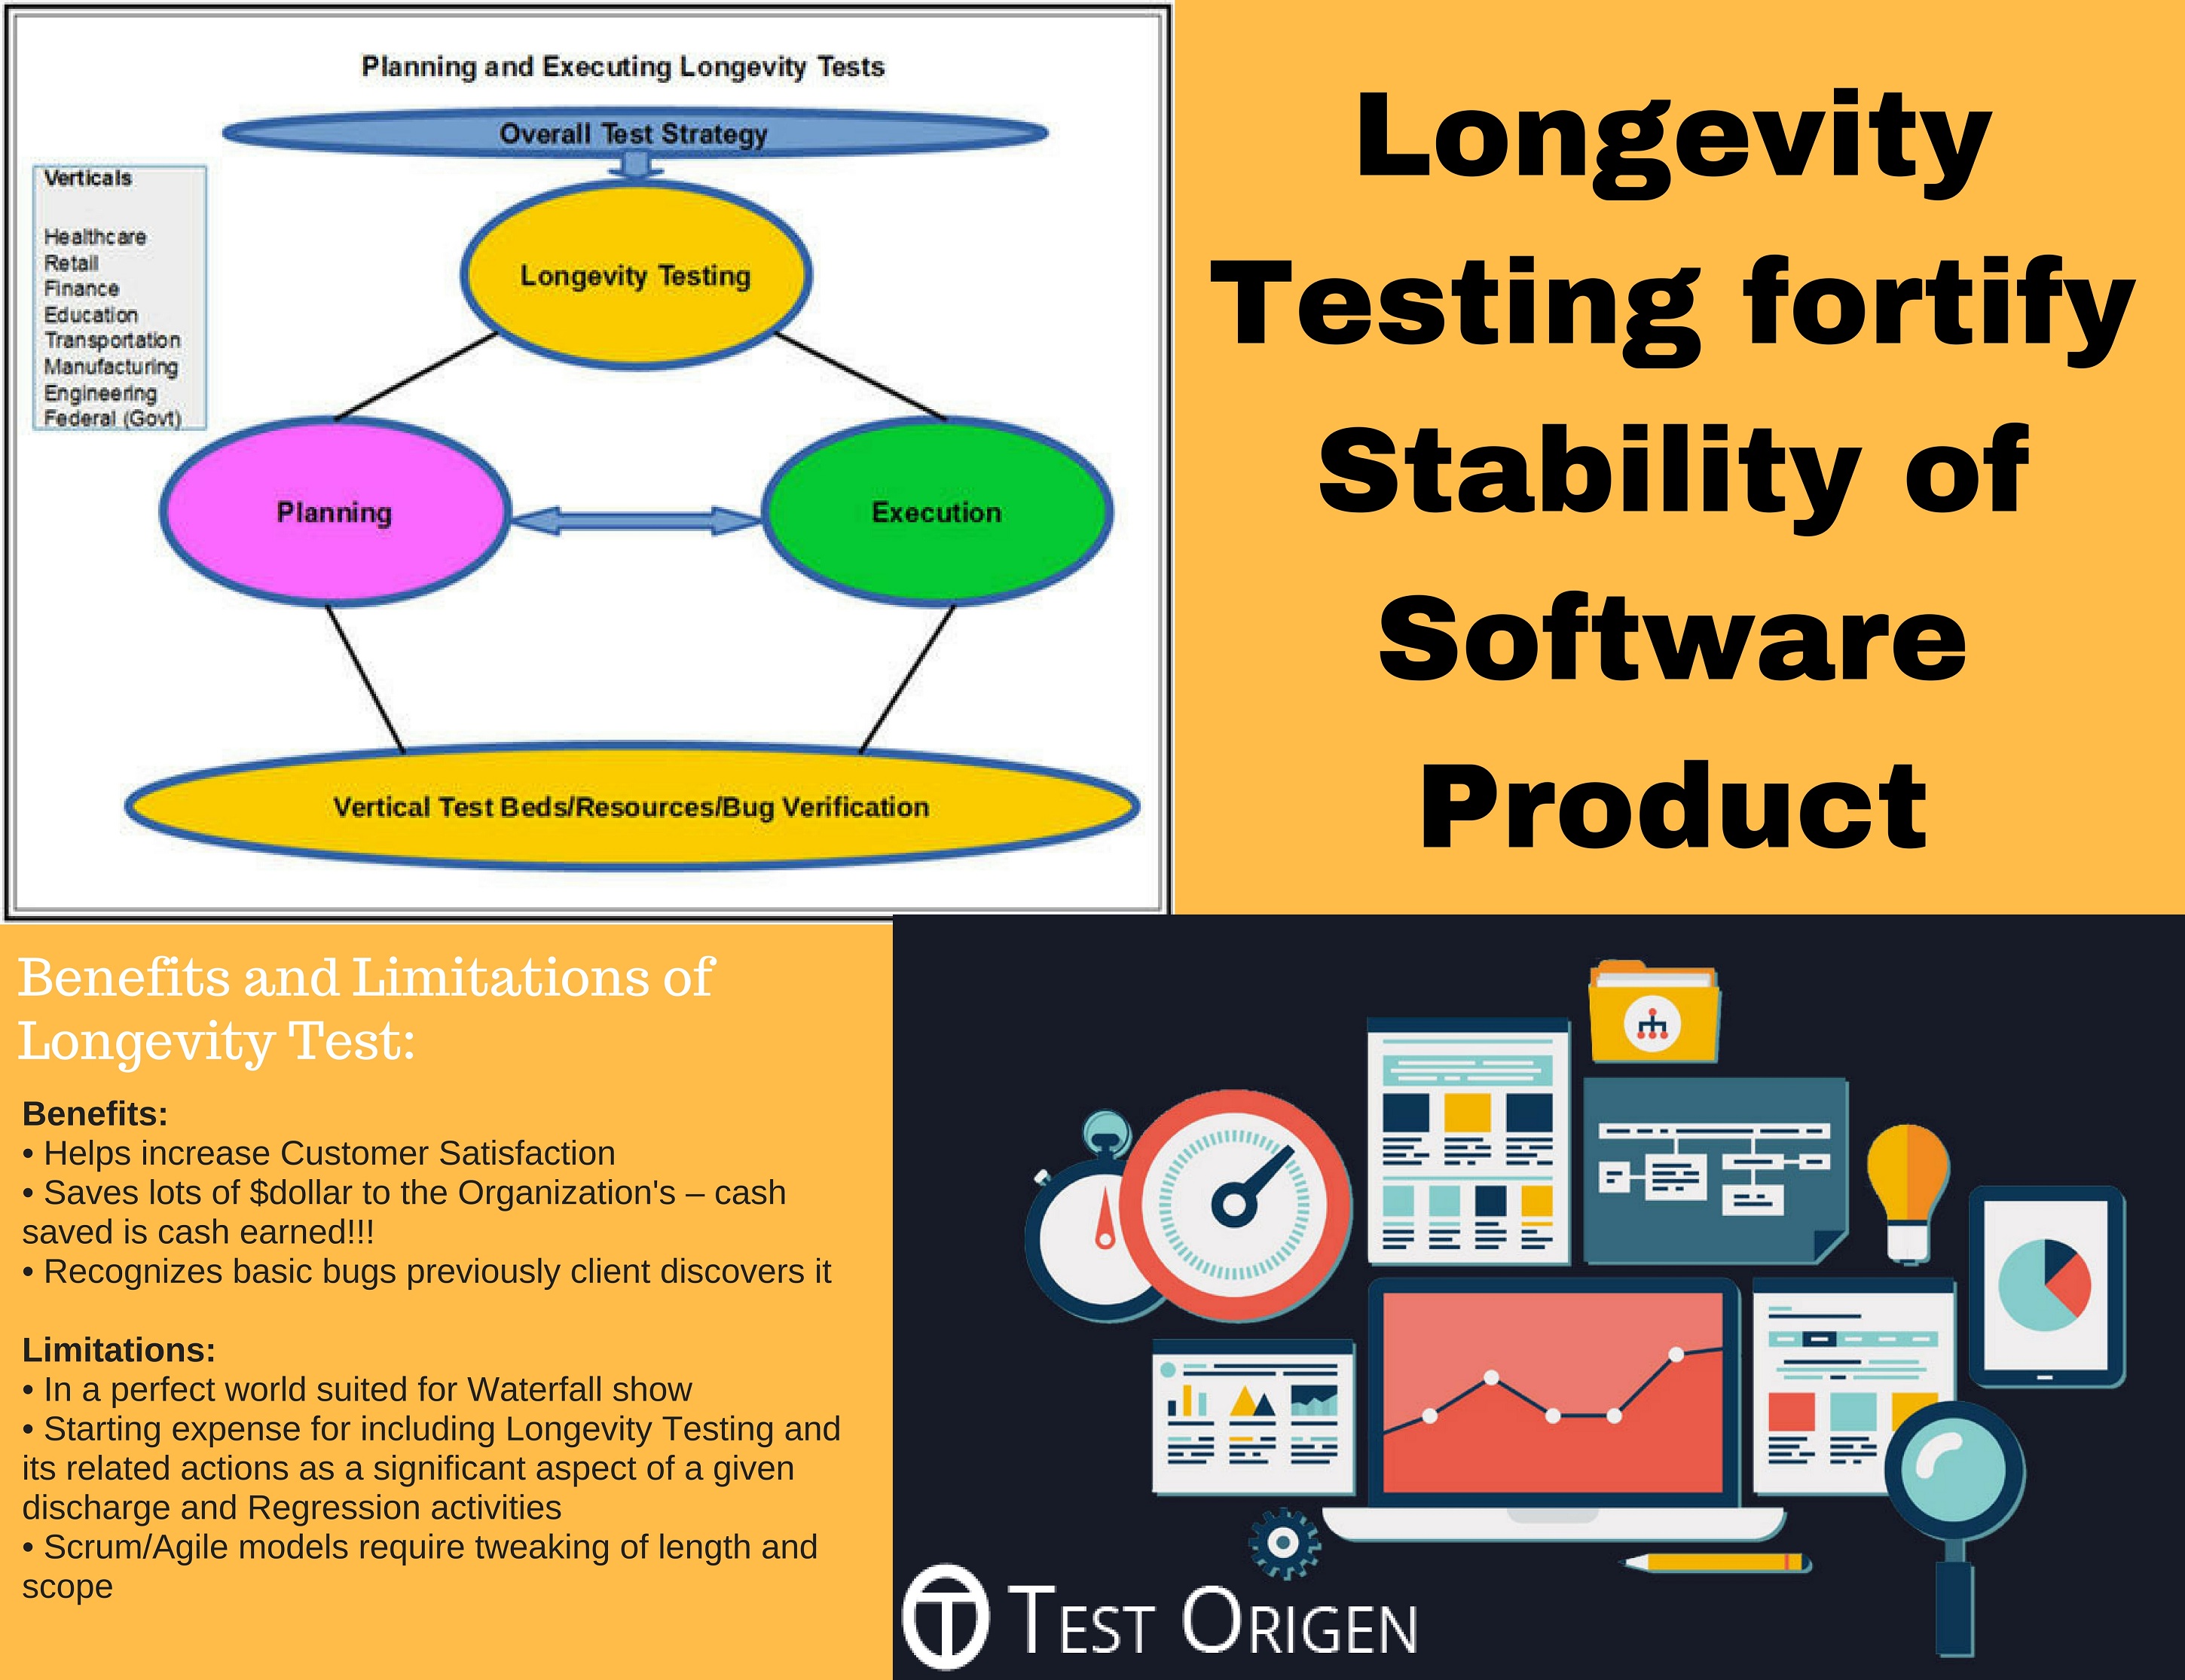 Longevity Testing fortify Stability of Software Product